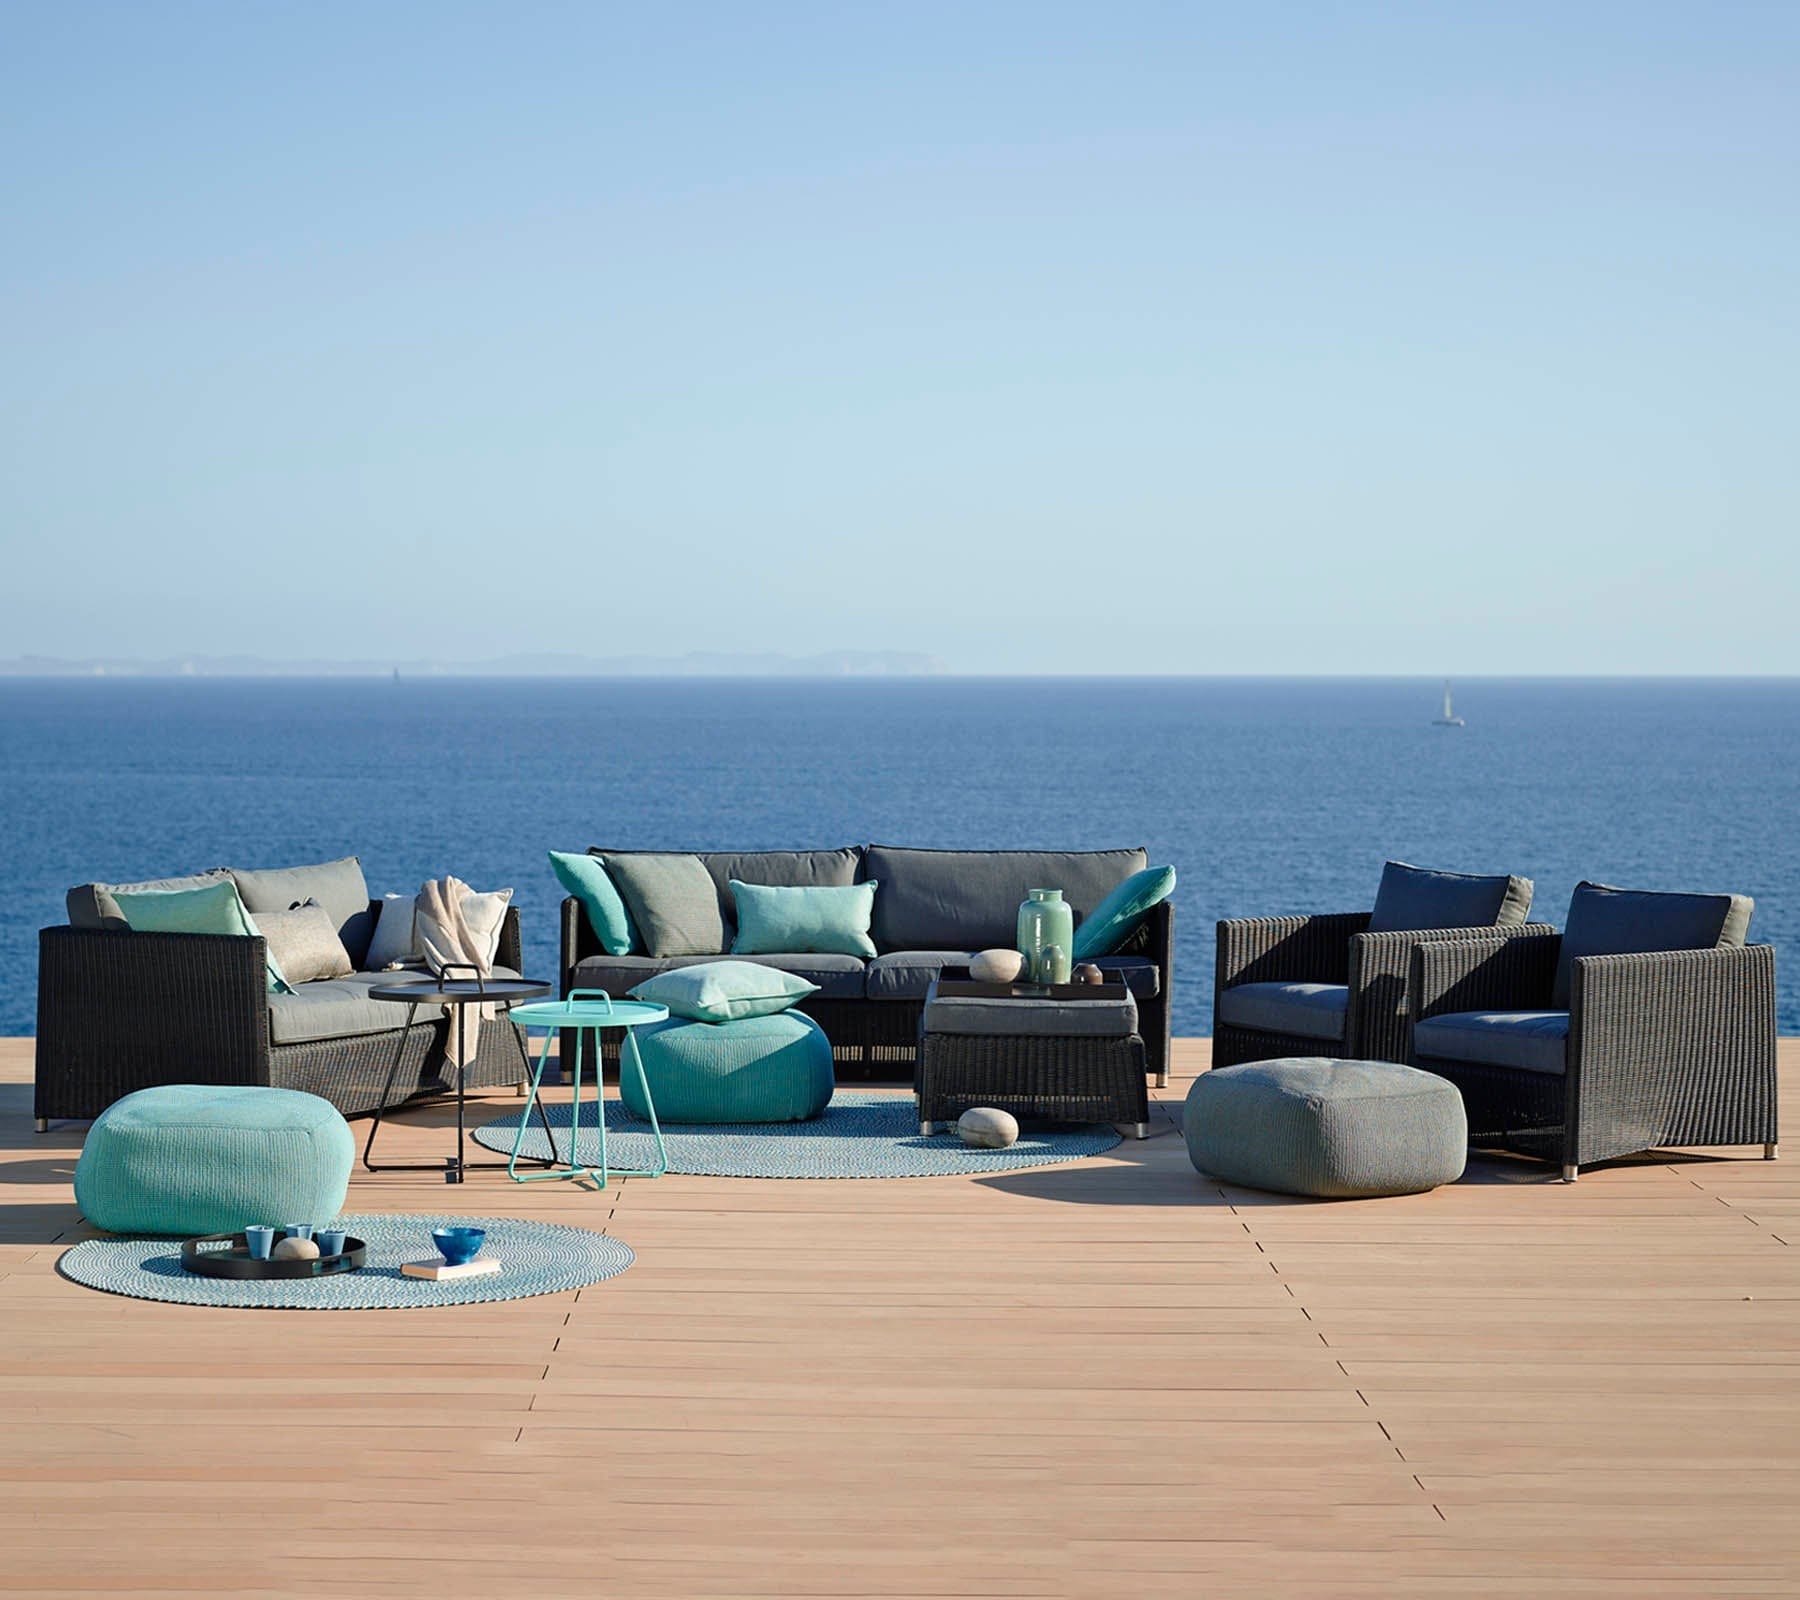 Boxhill's Diamond 3-Seater Weave Sofa lifestyle image with other Diamond Sofa collection on wooden platform at seafront